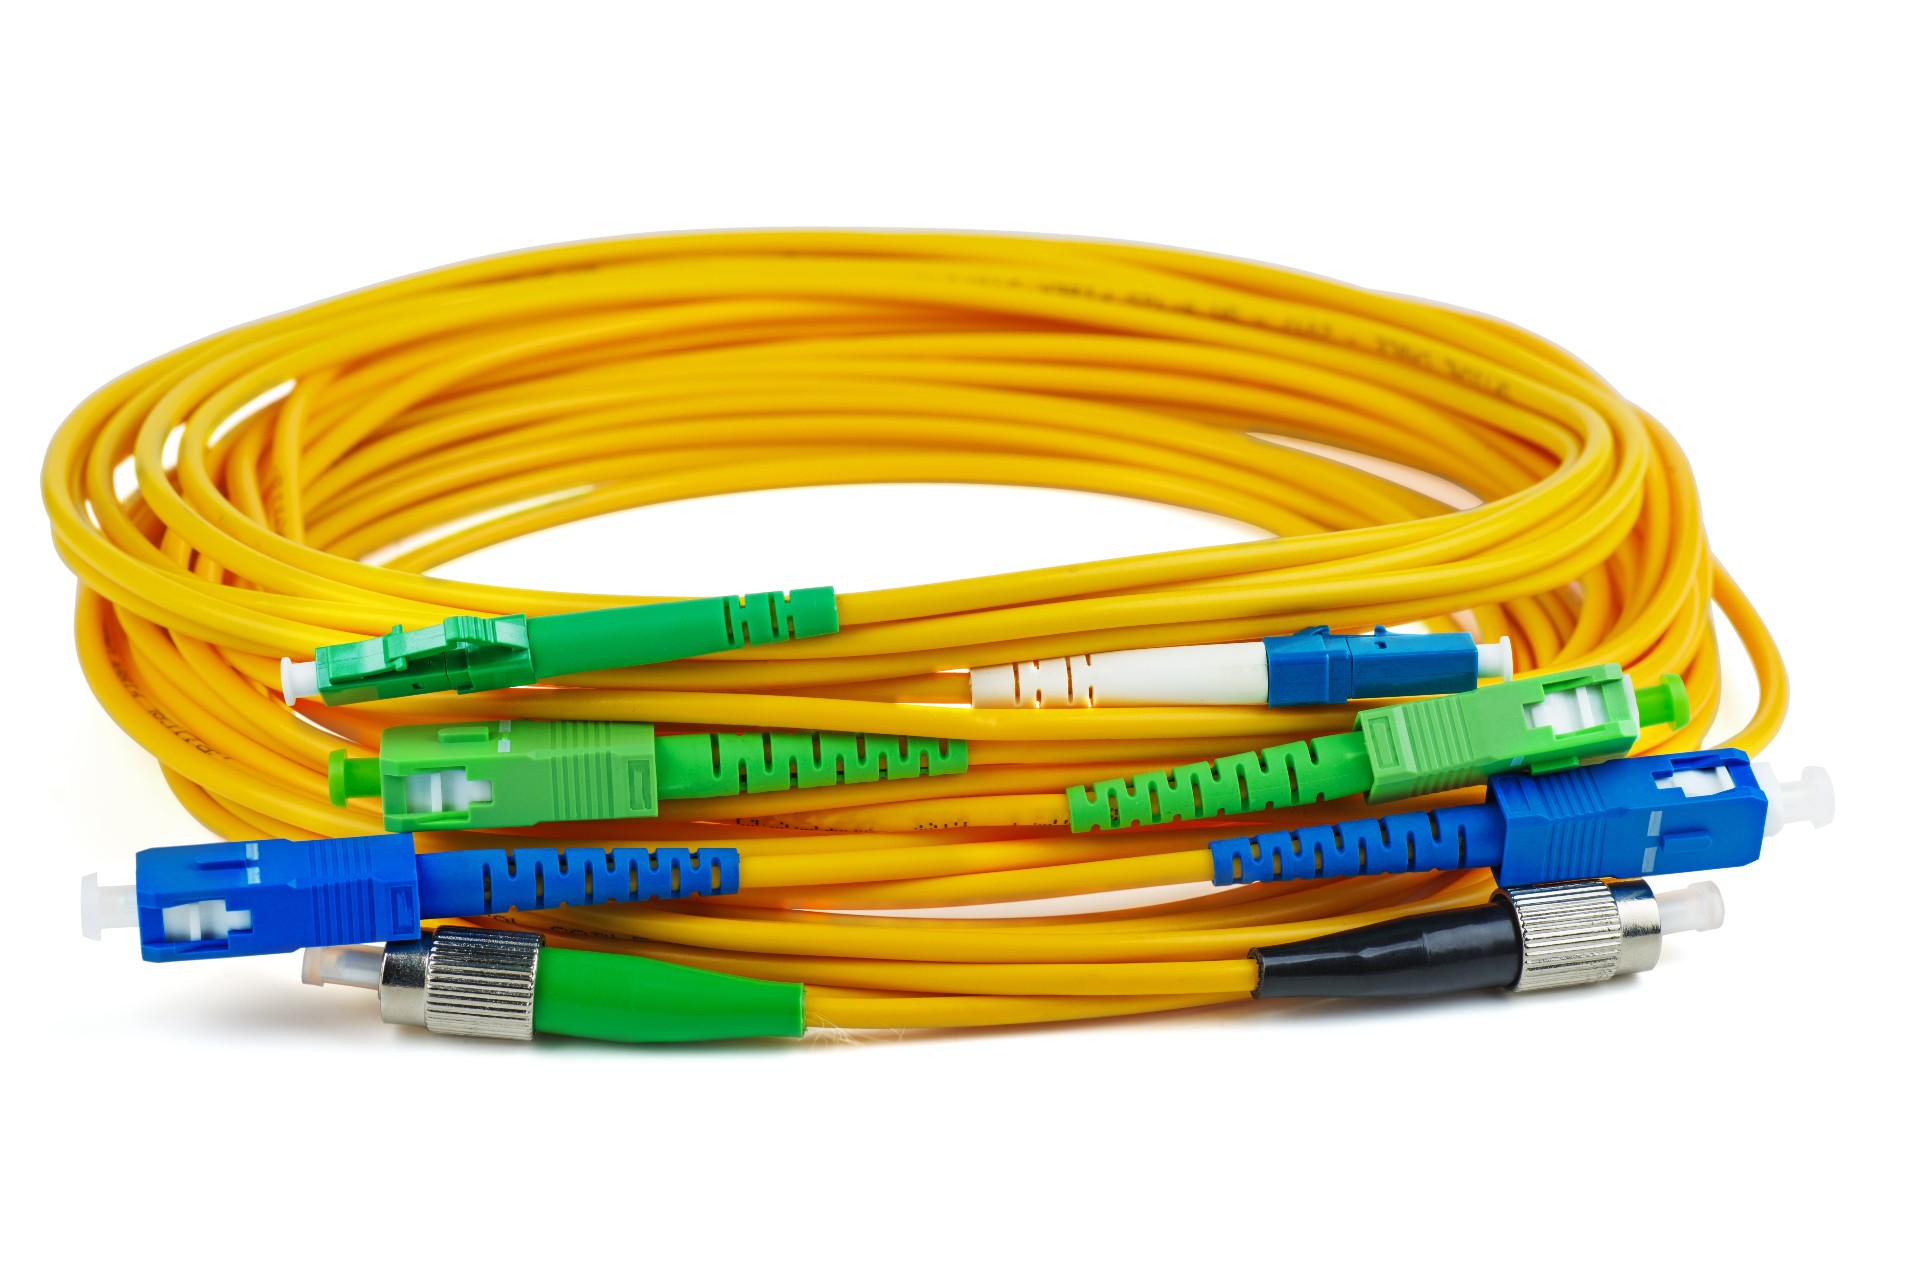 Equipment needed for server rack cable management - RackSolutions